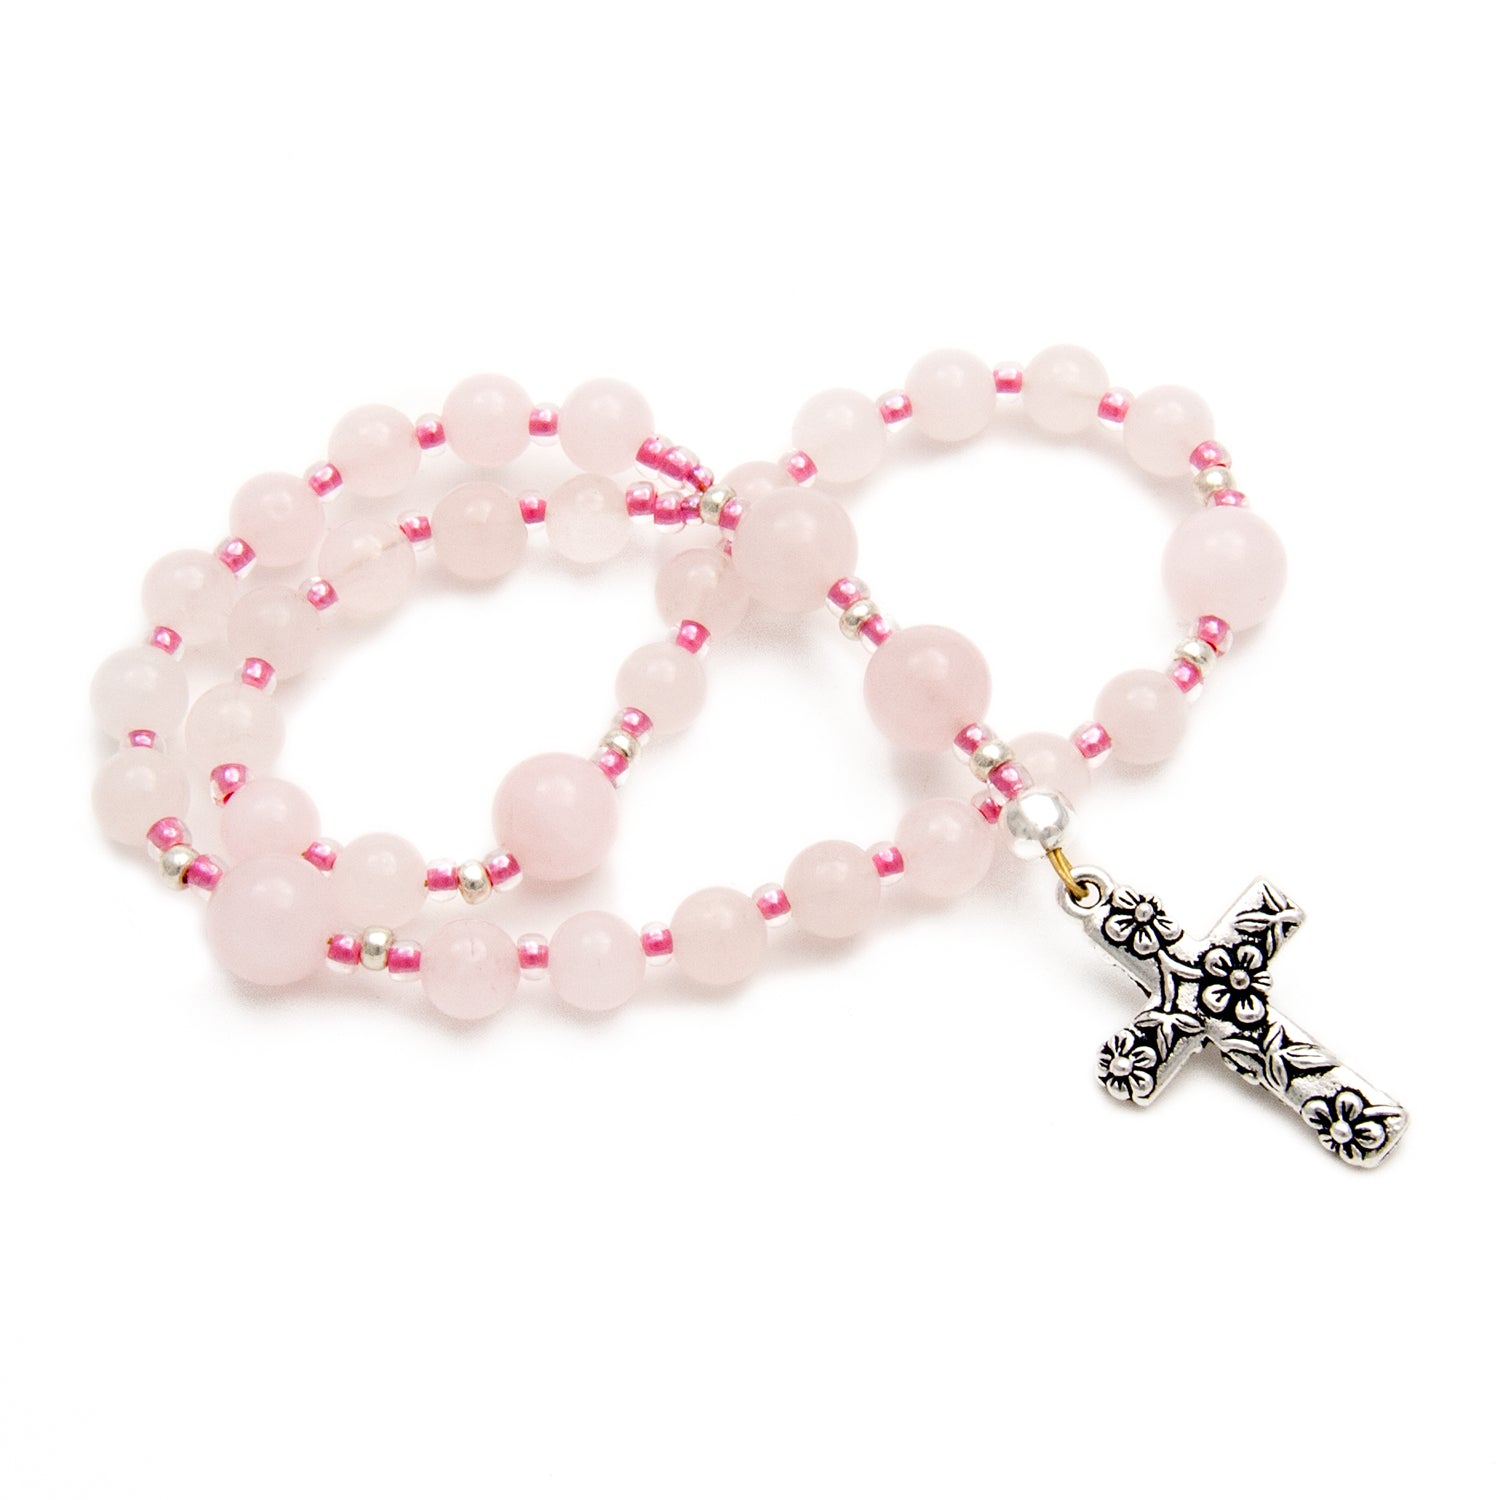 Ladies Anglican Prayer Beads Pink Rose Quartz with Floral Cross